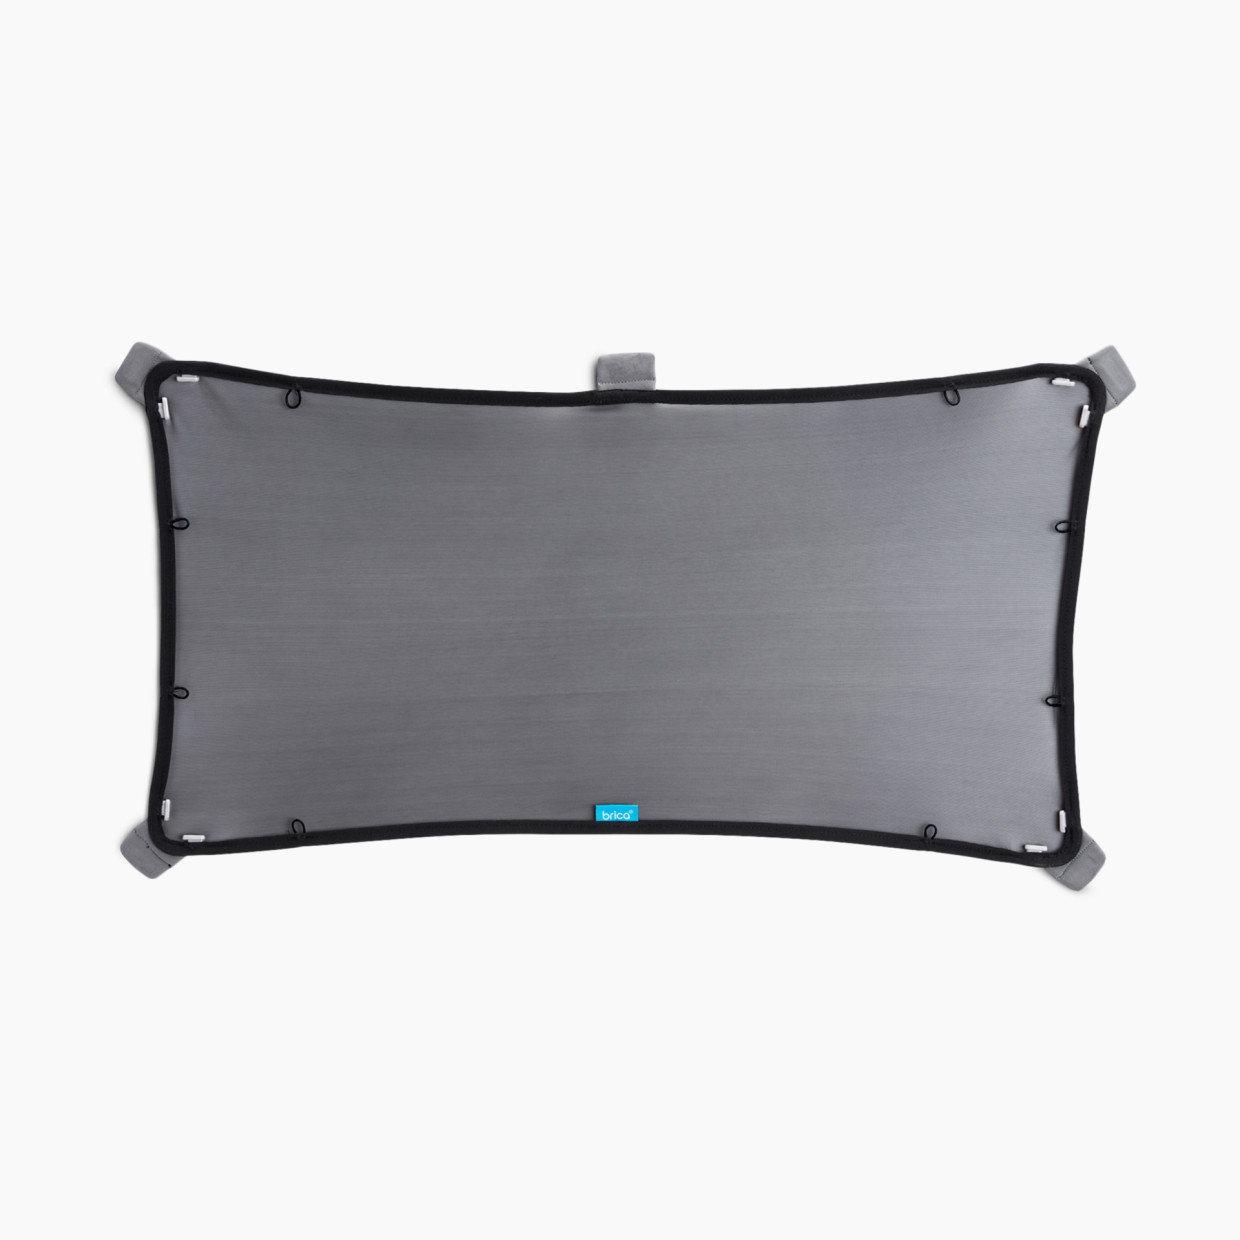 Brica Magnetic Stretch to Fit Car Sun Shade - Single Shade.